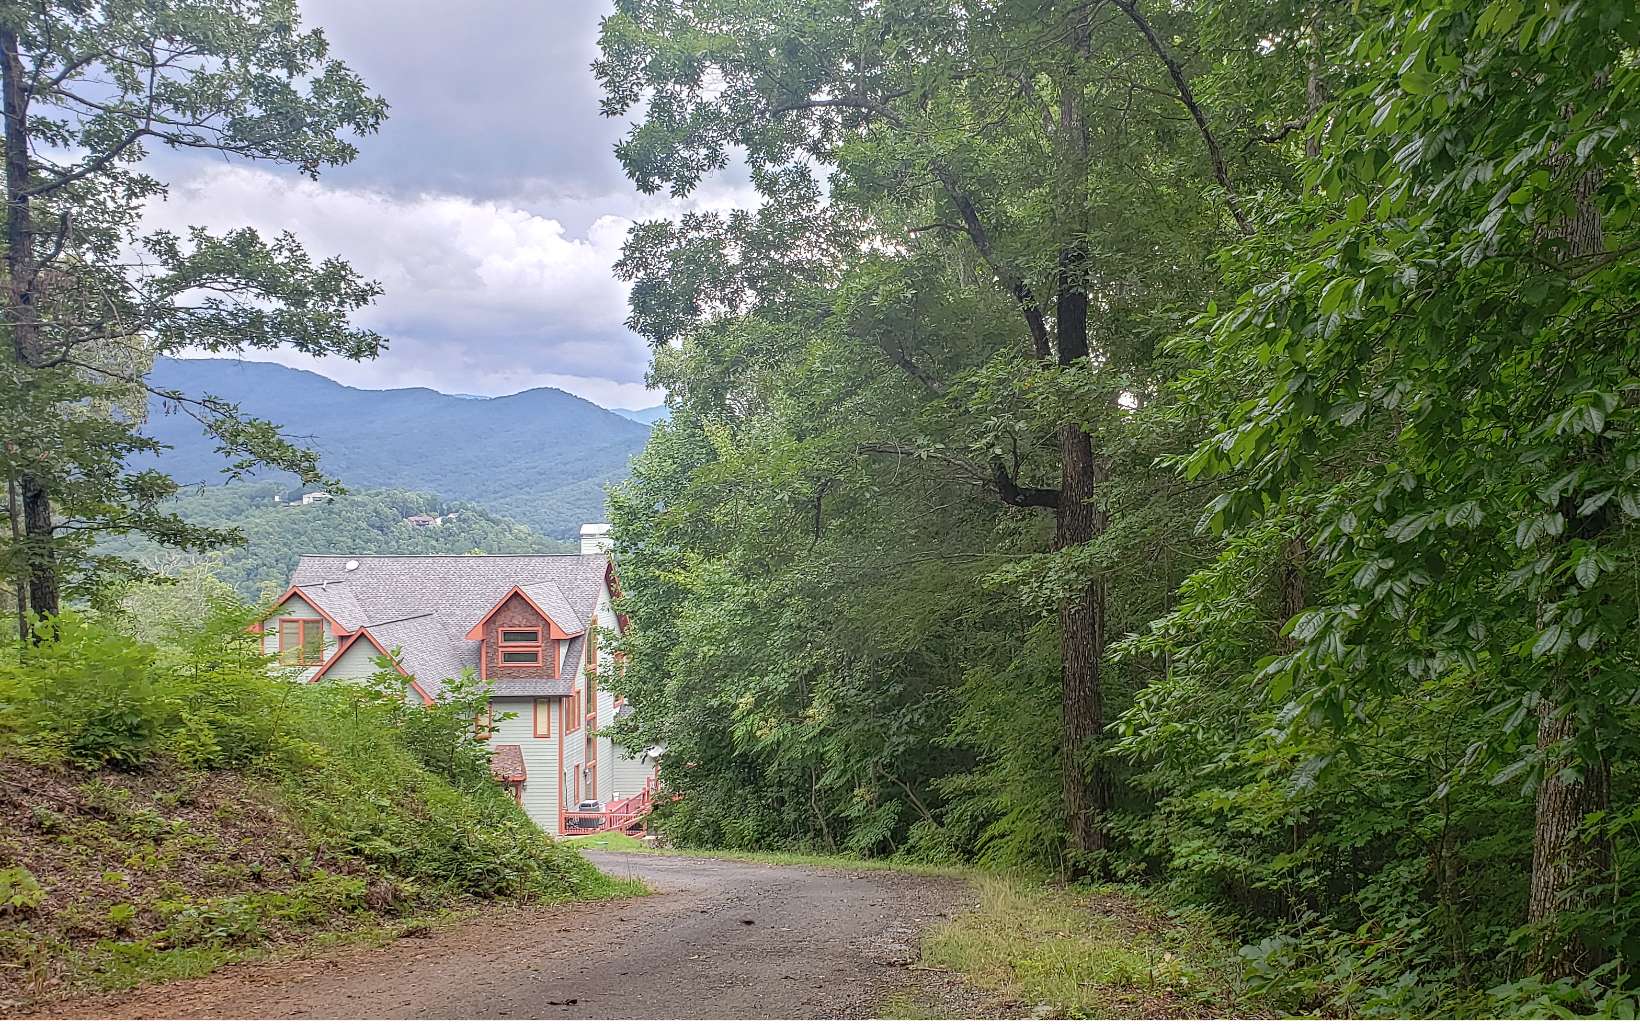 This Premium Lot has Power, Water, & Internet waiting to be connected to your new Mountain Home. This lot is at the top of the mountain with spectacular long range mountain views and a seasonal view of Lake Chatuge!